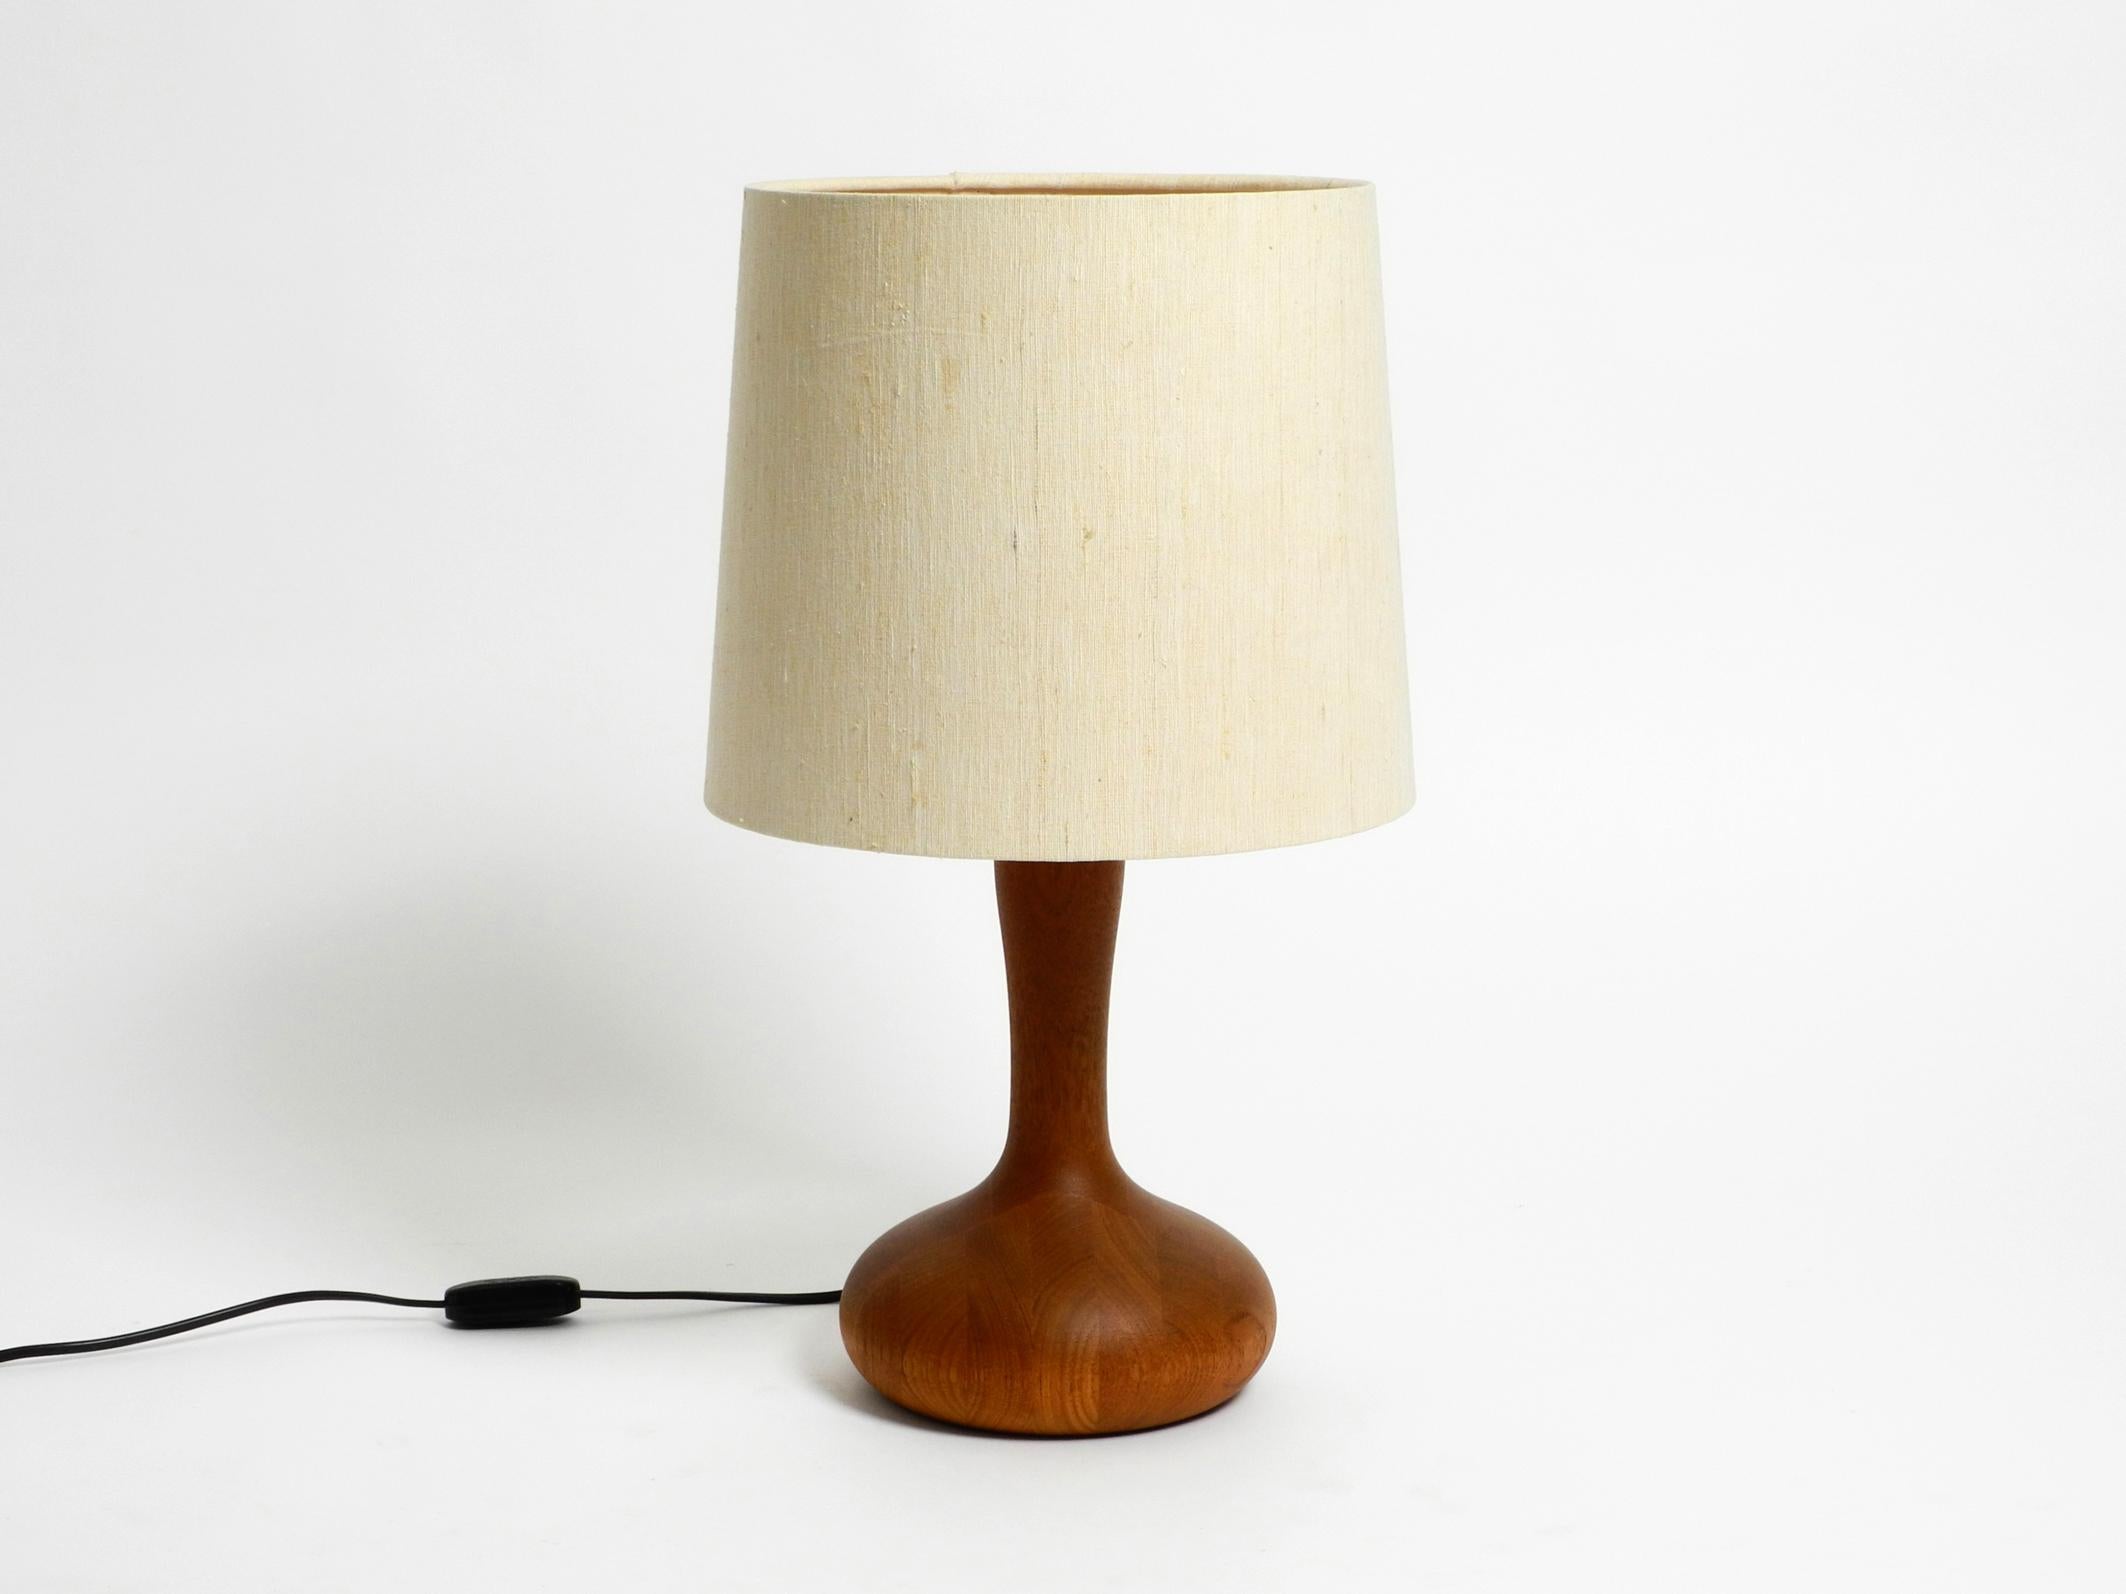 Beautiful minimalist 80s DOMUS teak table lamp with original wild silk fabric lampshade.
Foot is made entirely of teak. The large beige high-quality original fabric shade is covered with wild silk. Elegant design in very good vintage